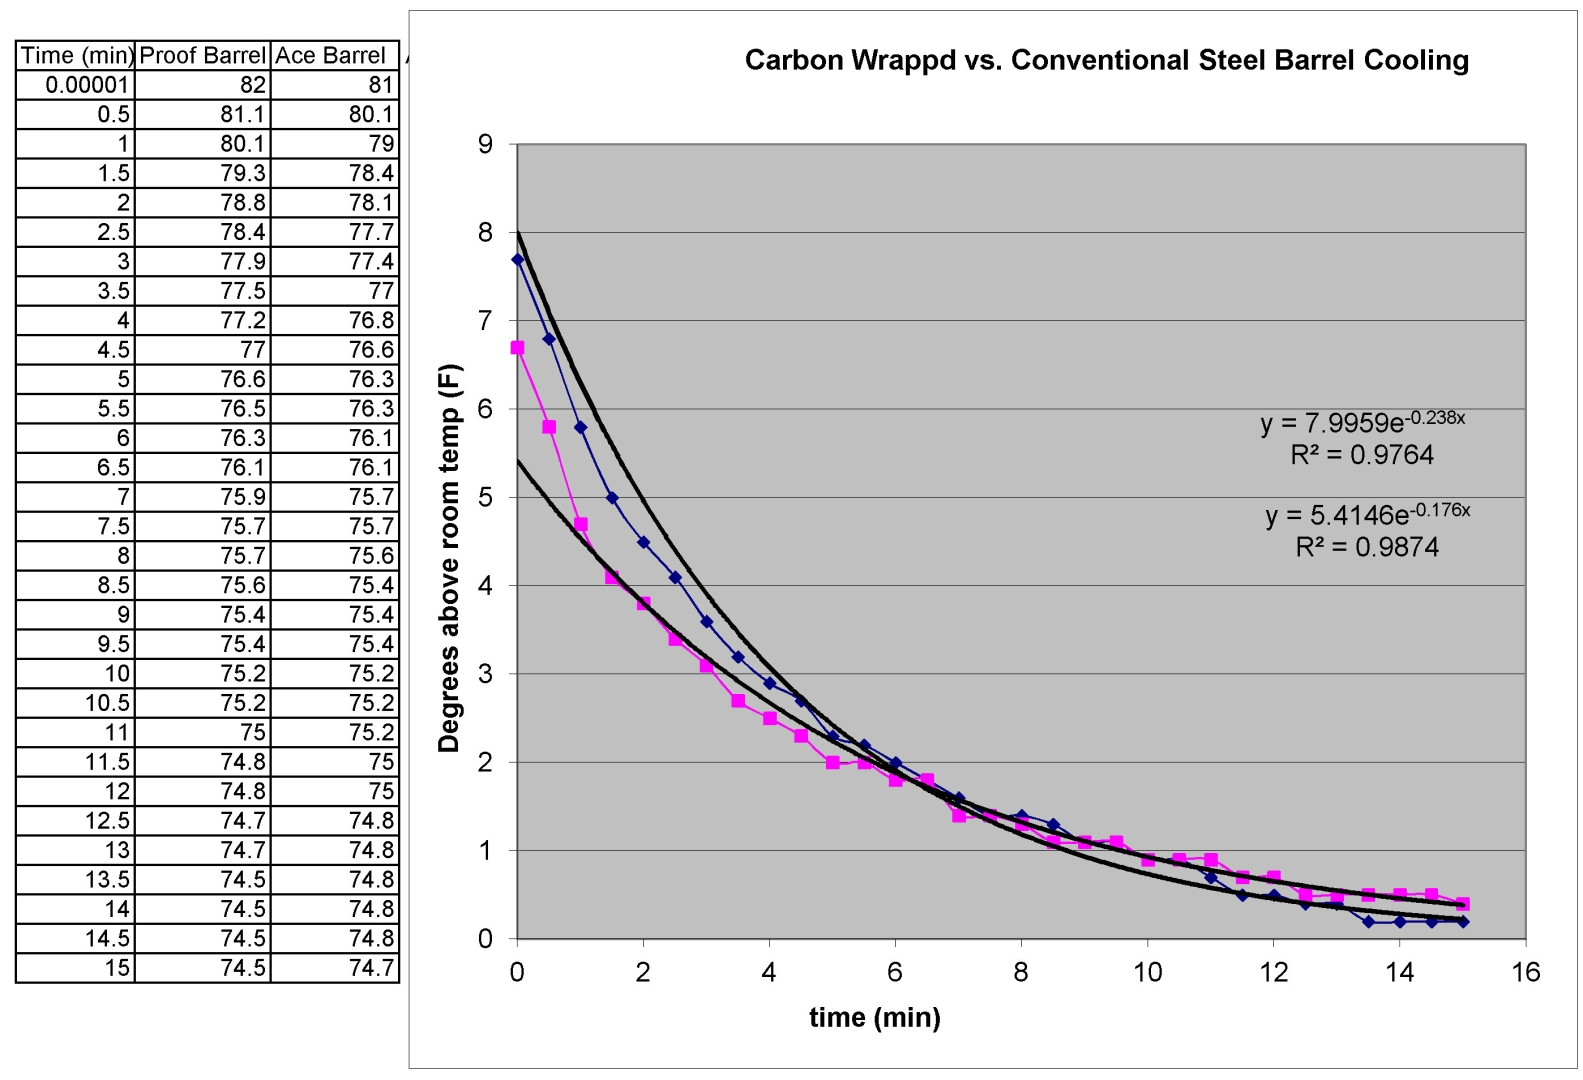 Plot of the Cooling of a Carbon Wrapped Proof Barrel vs. Conventional Steel Barrel